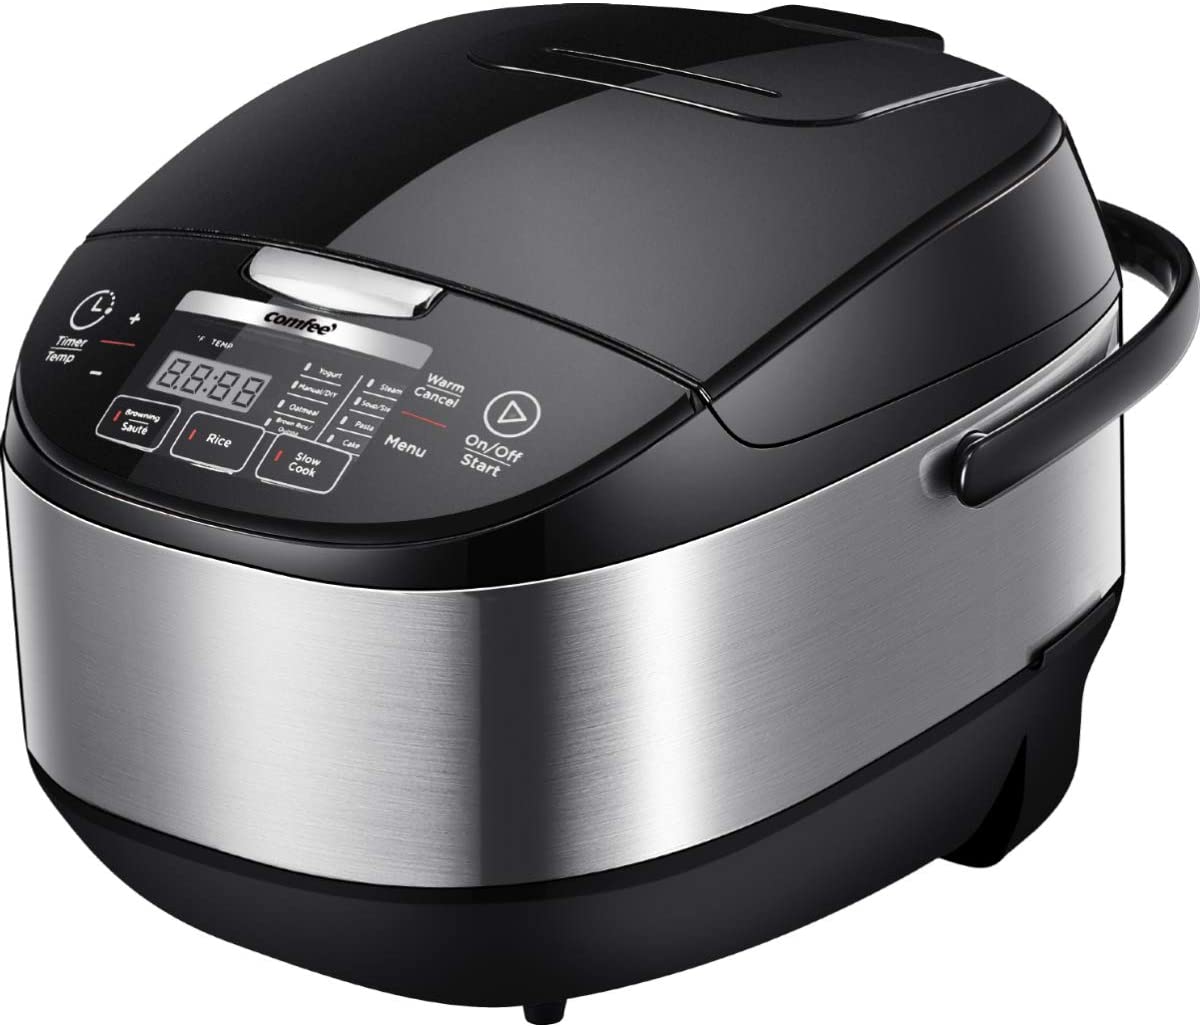 COMFEE' 5.2Qt Asian Style Programmable All-in-1 Multi Cooker, Rice Cooker, Slow cooker, Steamer, Sauté, Yogurt maker, Stewpot with 24 Hours